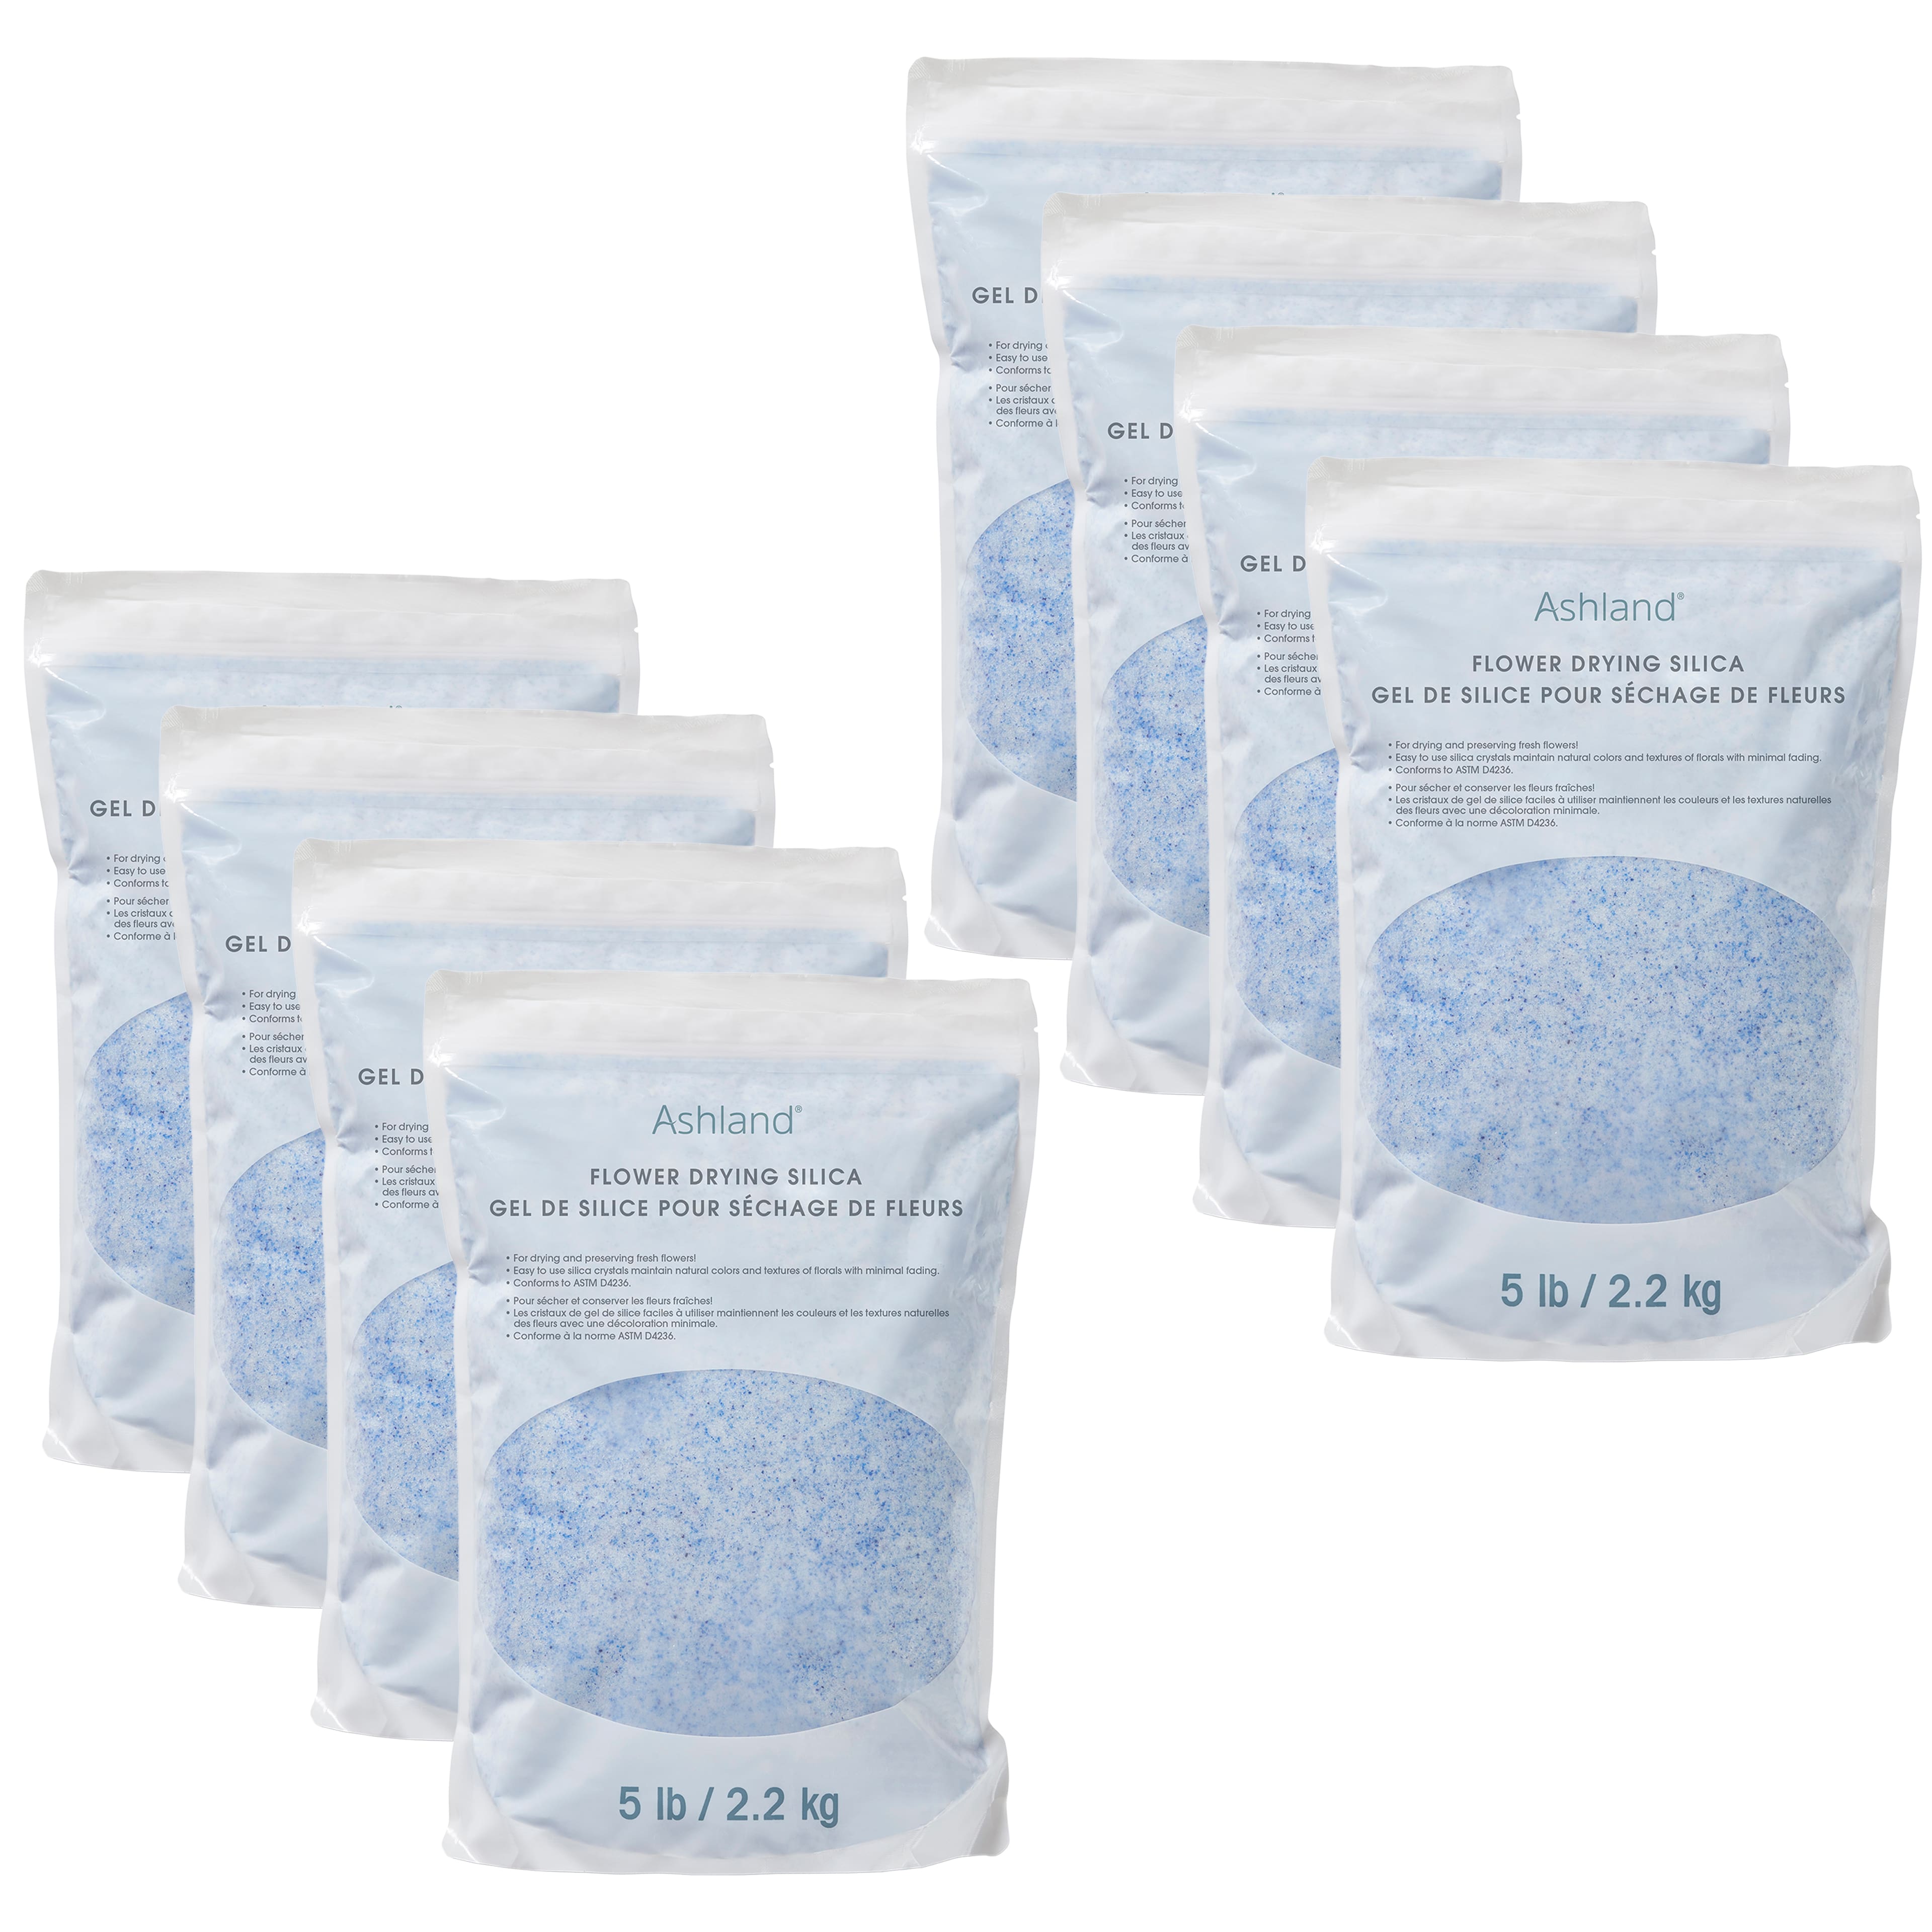 Dry & Dry Premium Orange Indicating Silica Gel for Flower Drying Desiccant  - (Net 44 LBS)